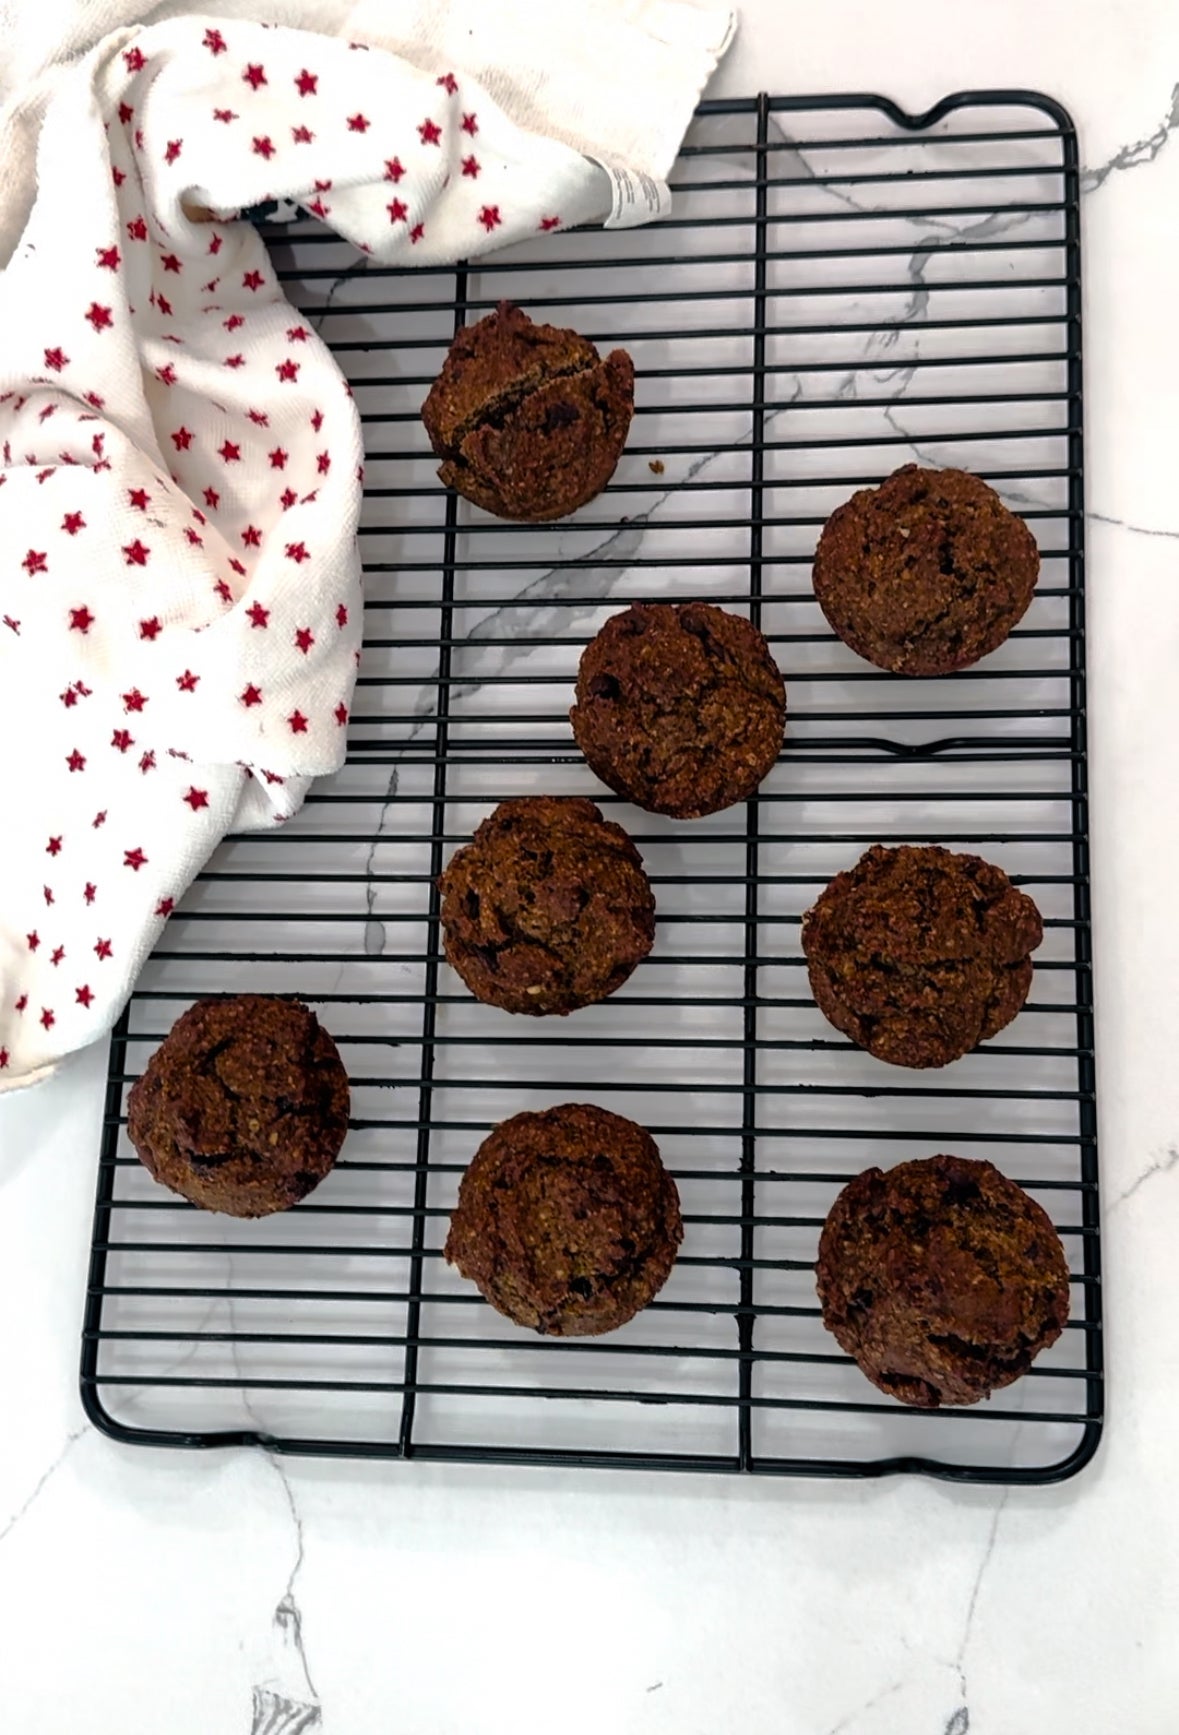 Chocolate Chip Banana Muffins (with invisible lentils!)